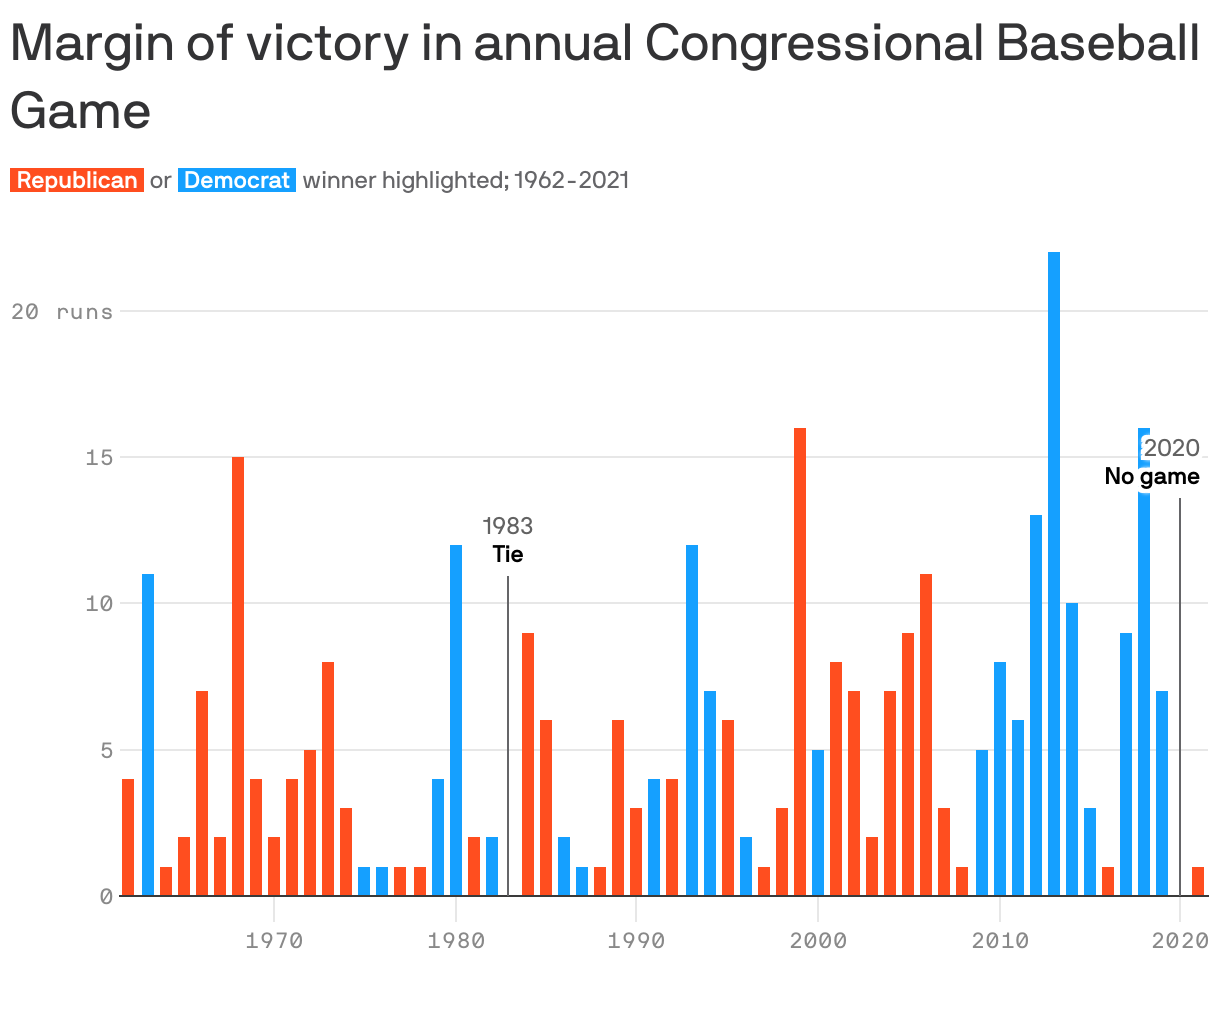 Margin of victory in annual Congressional baseball game